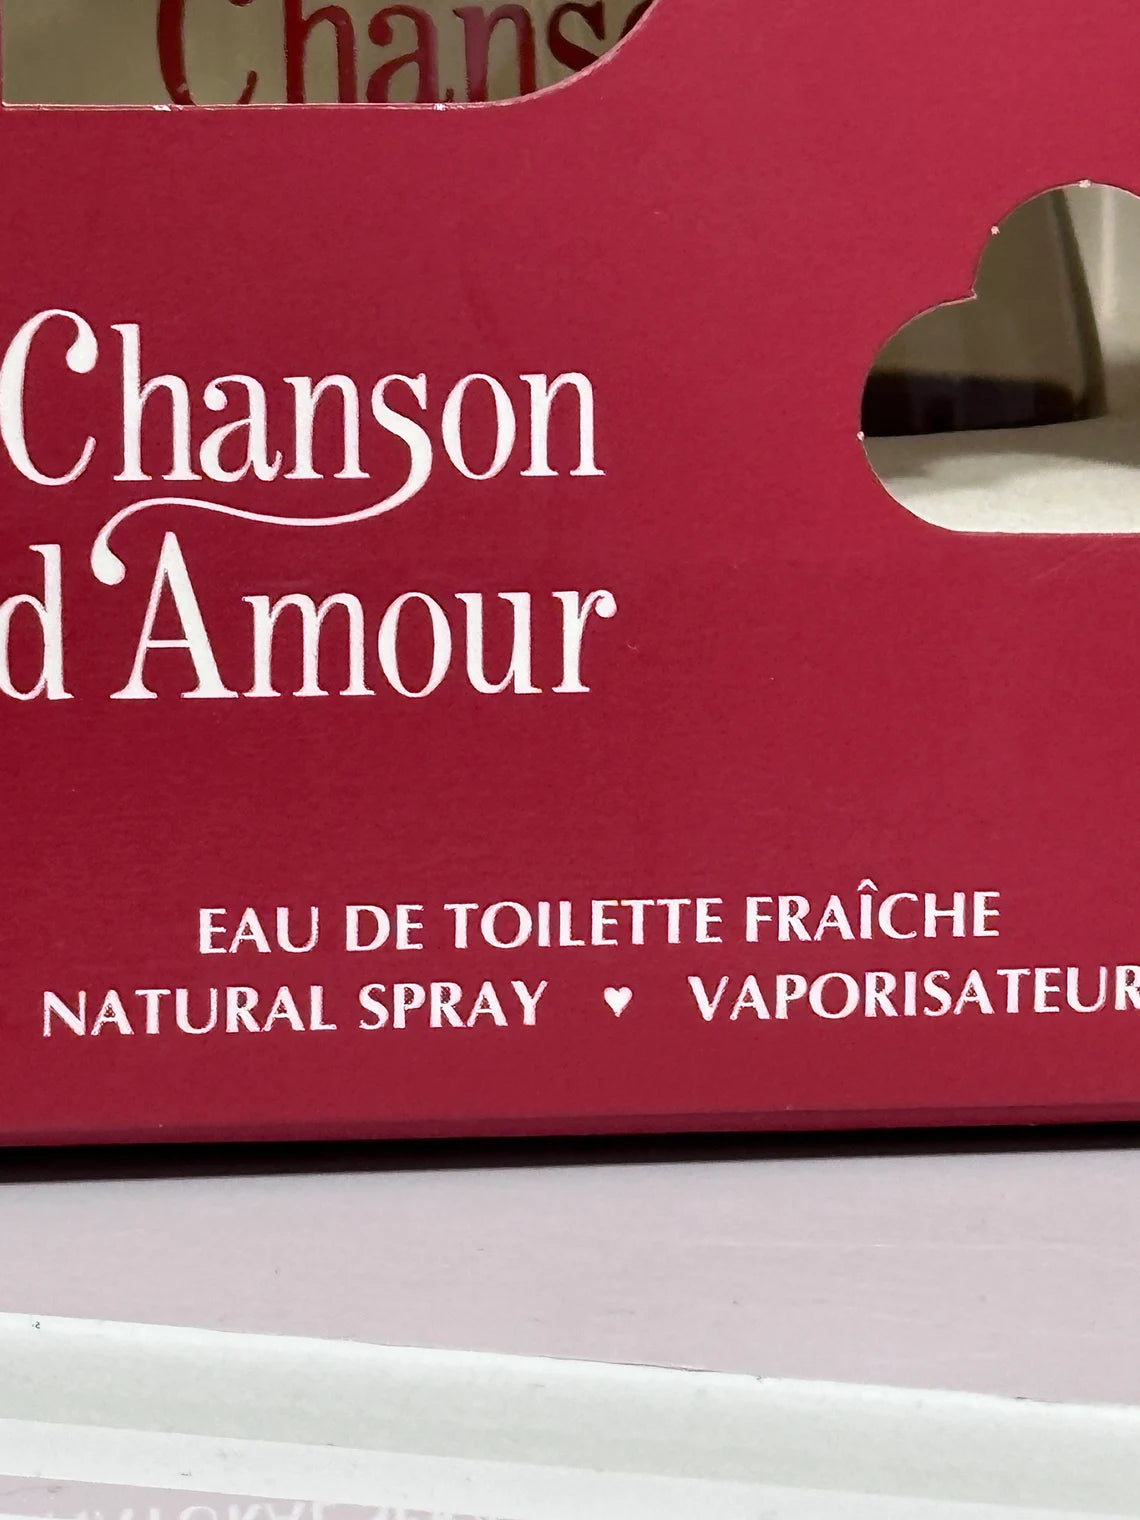 CHANSON D AMOUR COTY Eau de toilette new in box new in box 100ml spray unused. Without using.